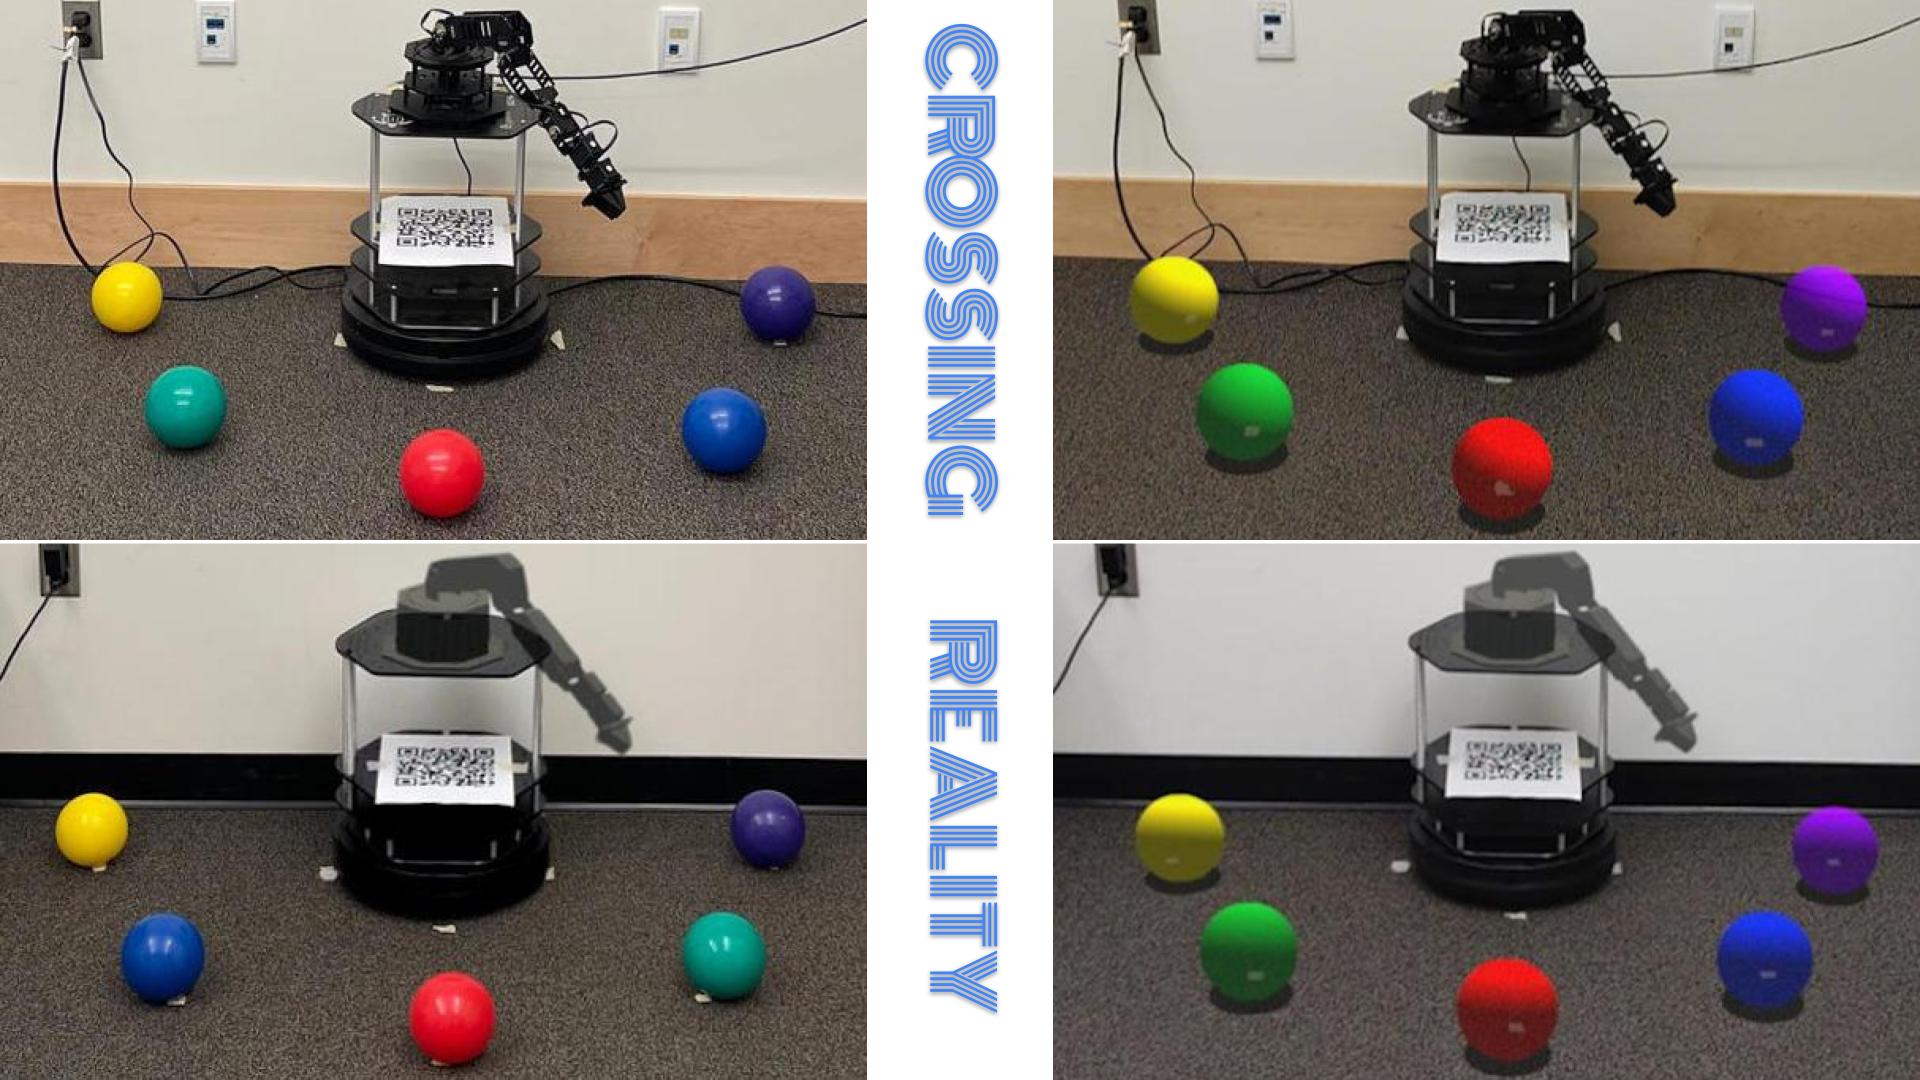 Crossing Reality: Comparing Physical and Virtual Robot Deixis